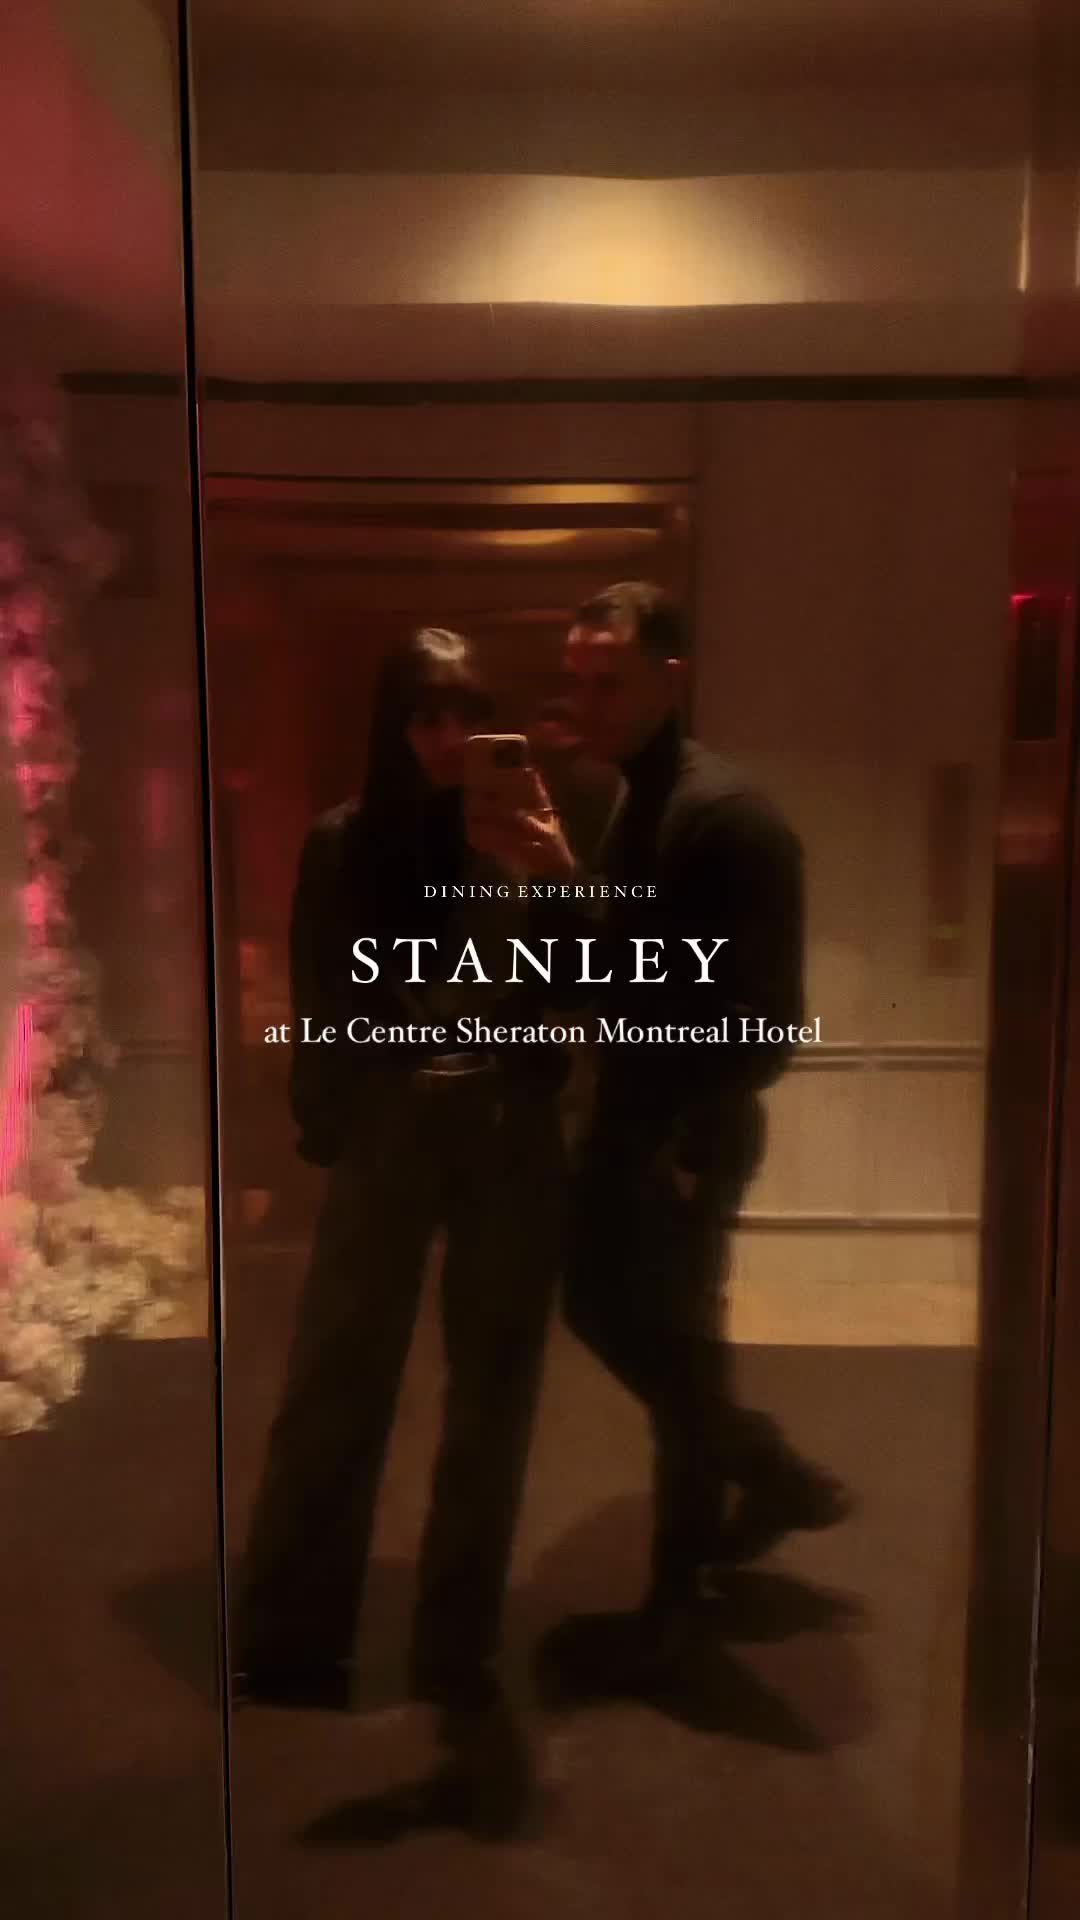 First Dinner Date at Stanley Montreal 🇨🇦